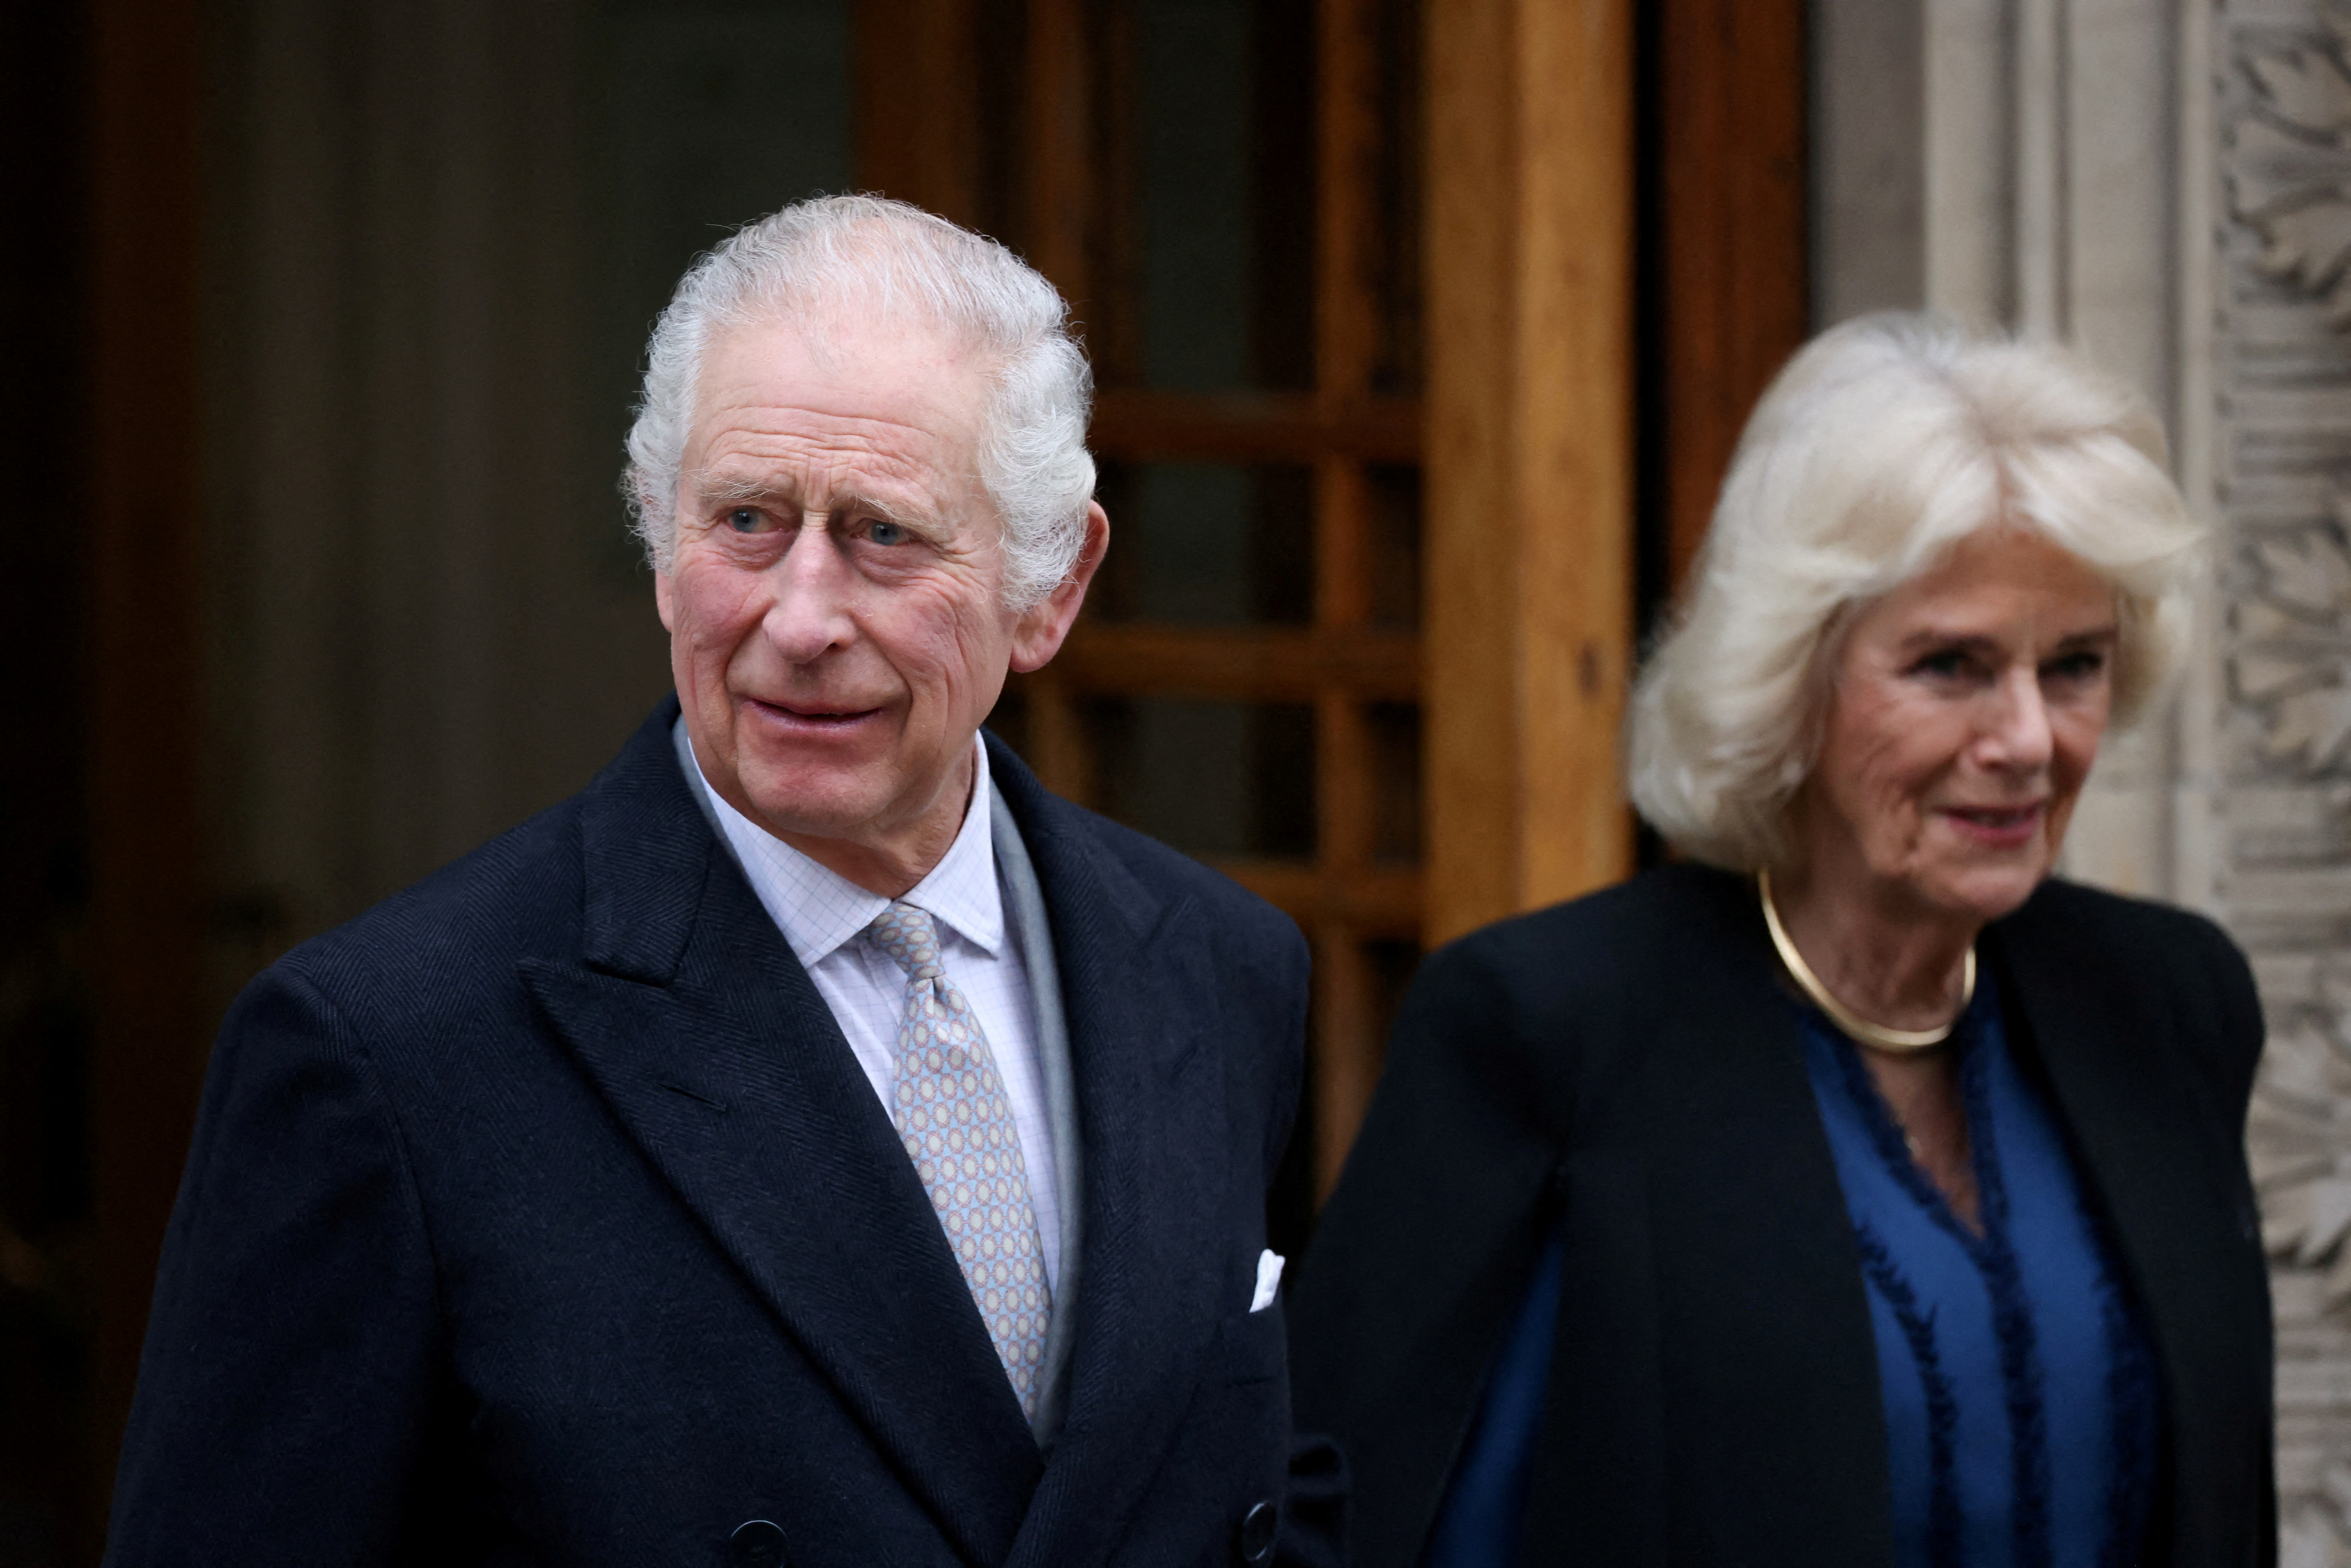 Charles was seen smiling with Camilla leaving The London Clinic after his prostate op